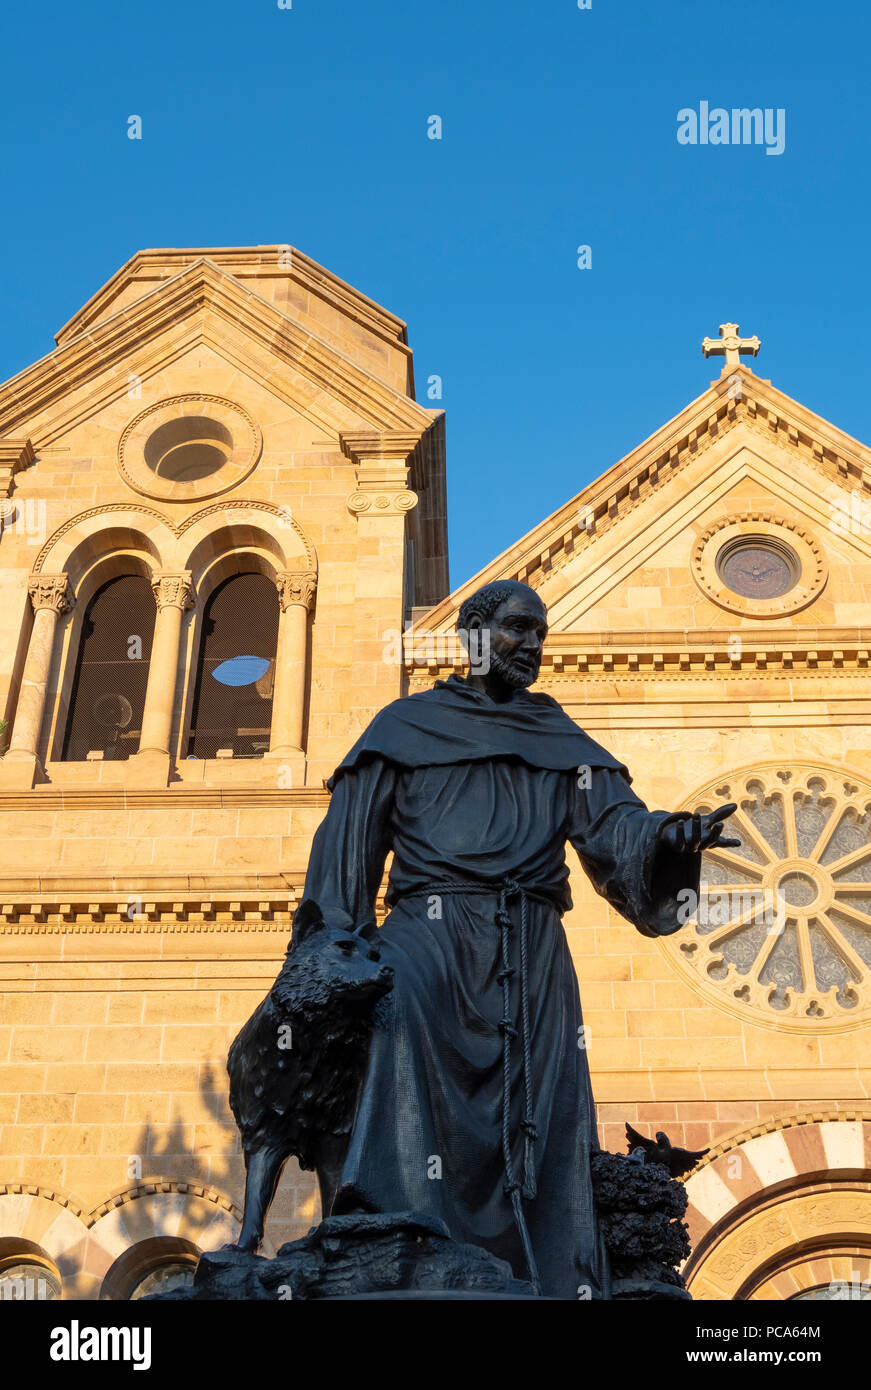 Cathedral Basilica of St. Francis of Assisi, Santa Fe, NM, USA, by Dominique Braud/Dembinsky Photo Assoc Stock Photo